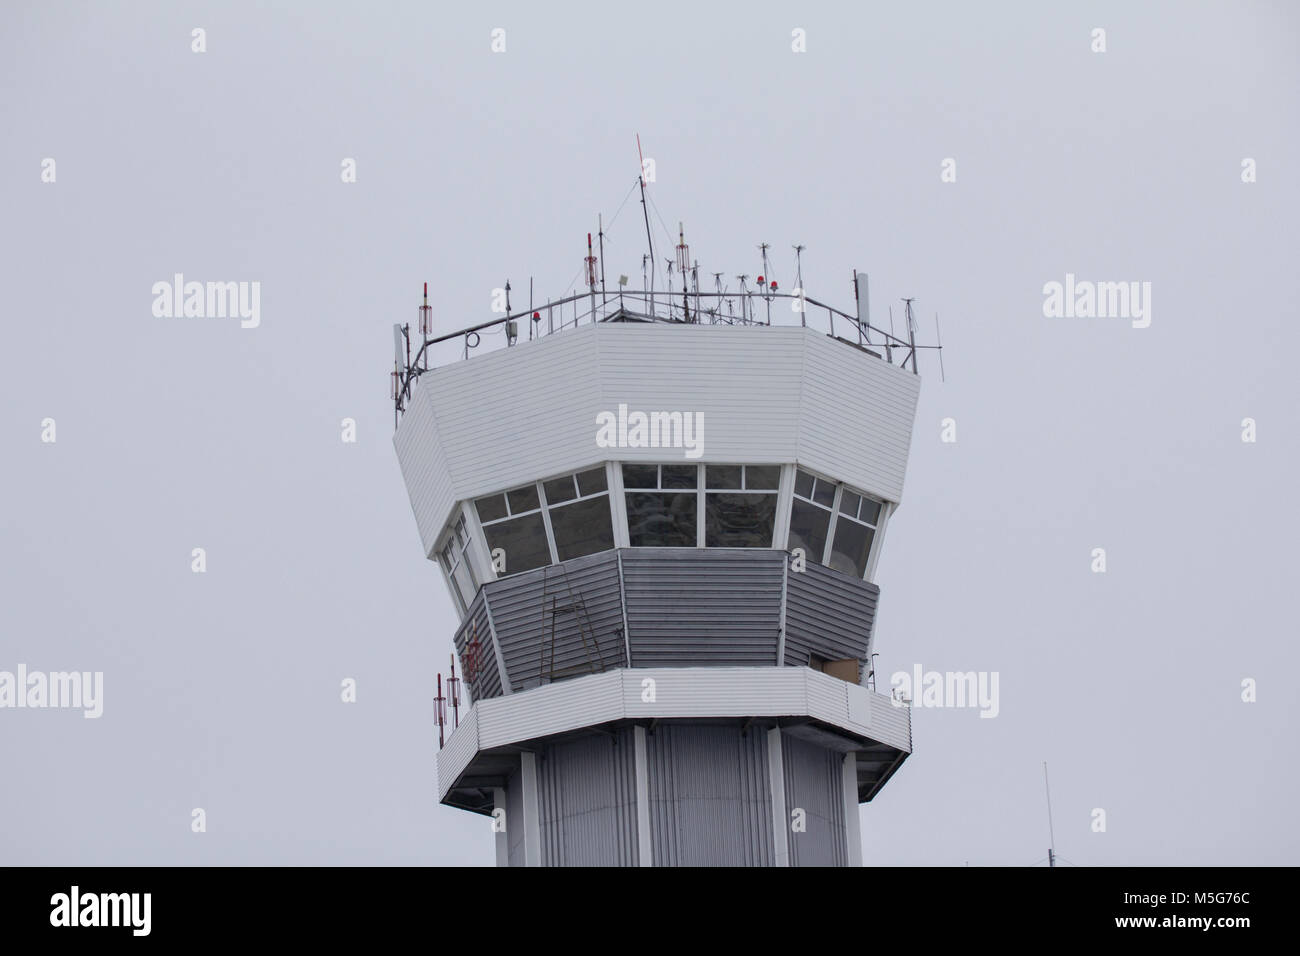 Observe airport tower in cloudy sky Stock Photo